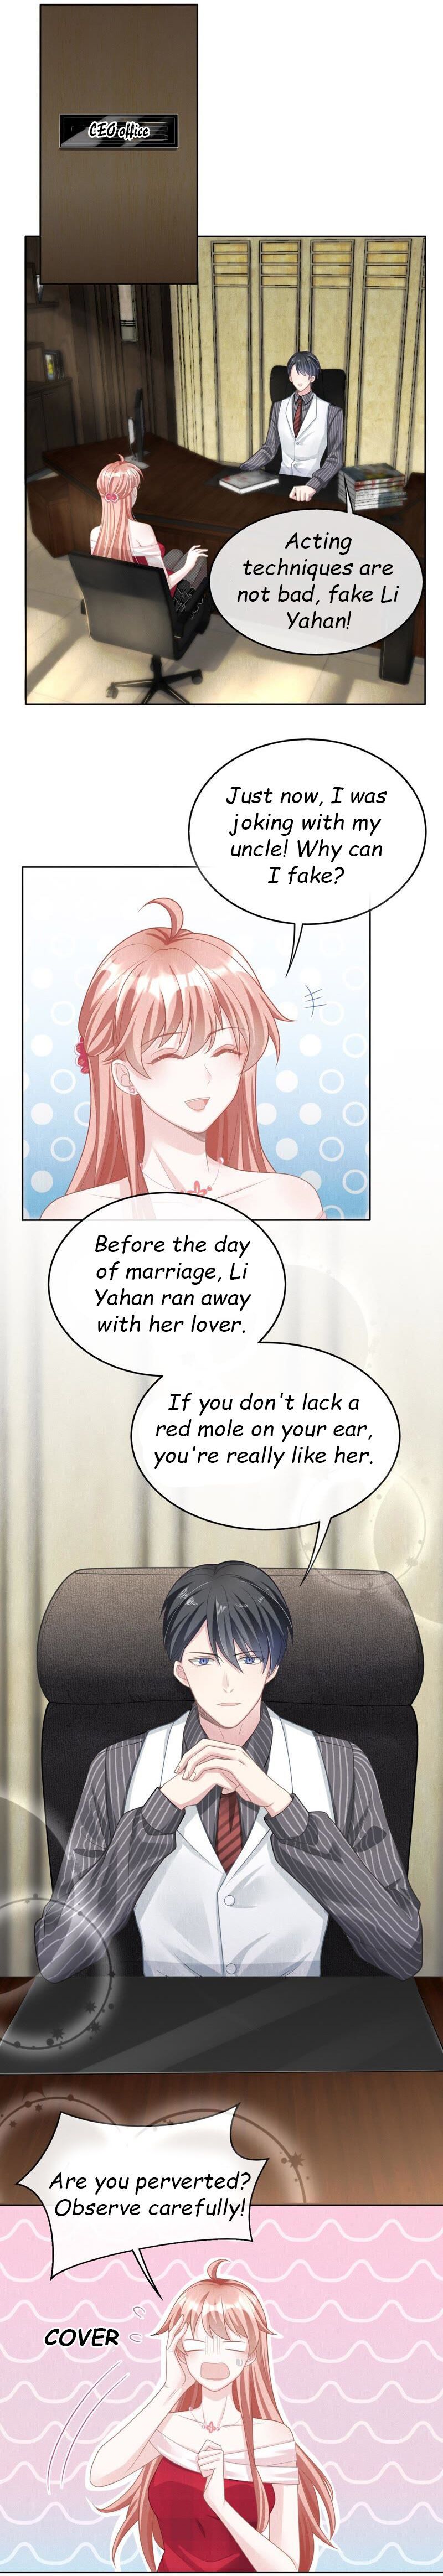 Fake Bride Chapter 5.1 page 1